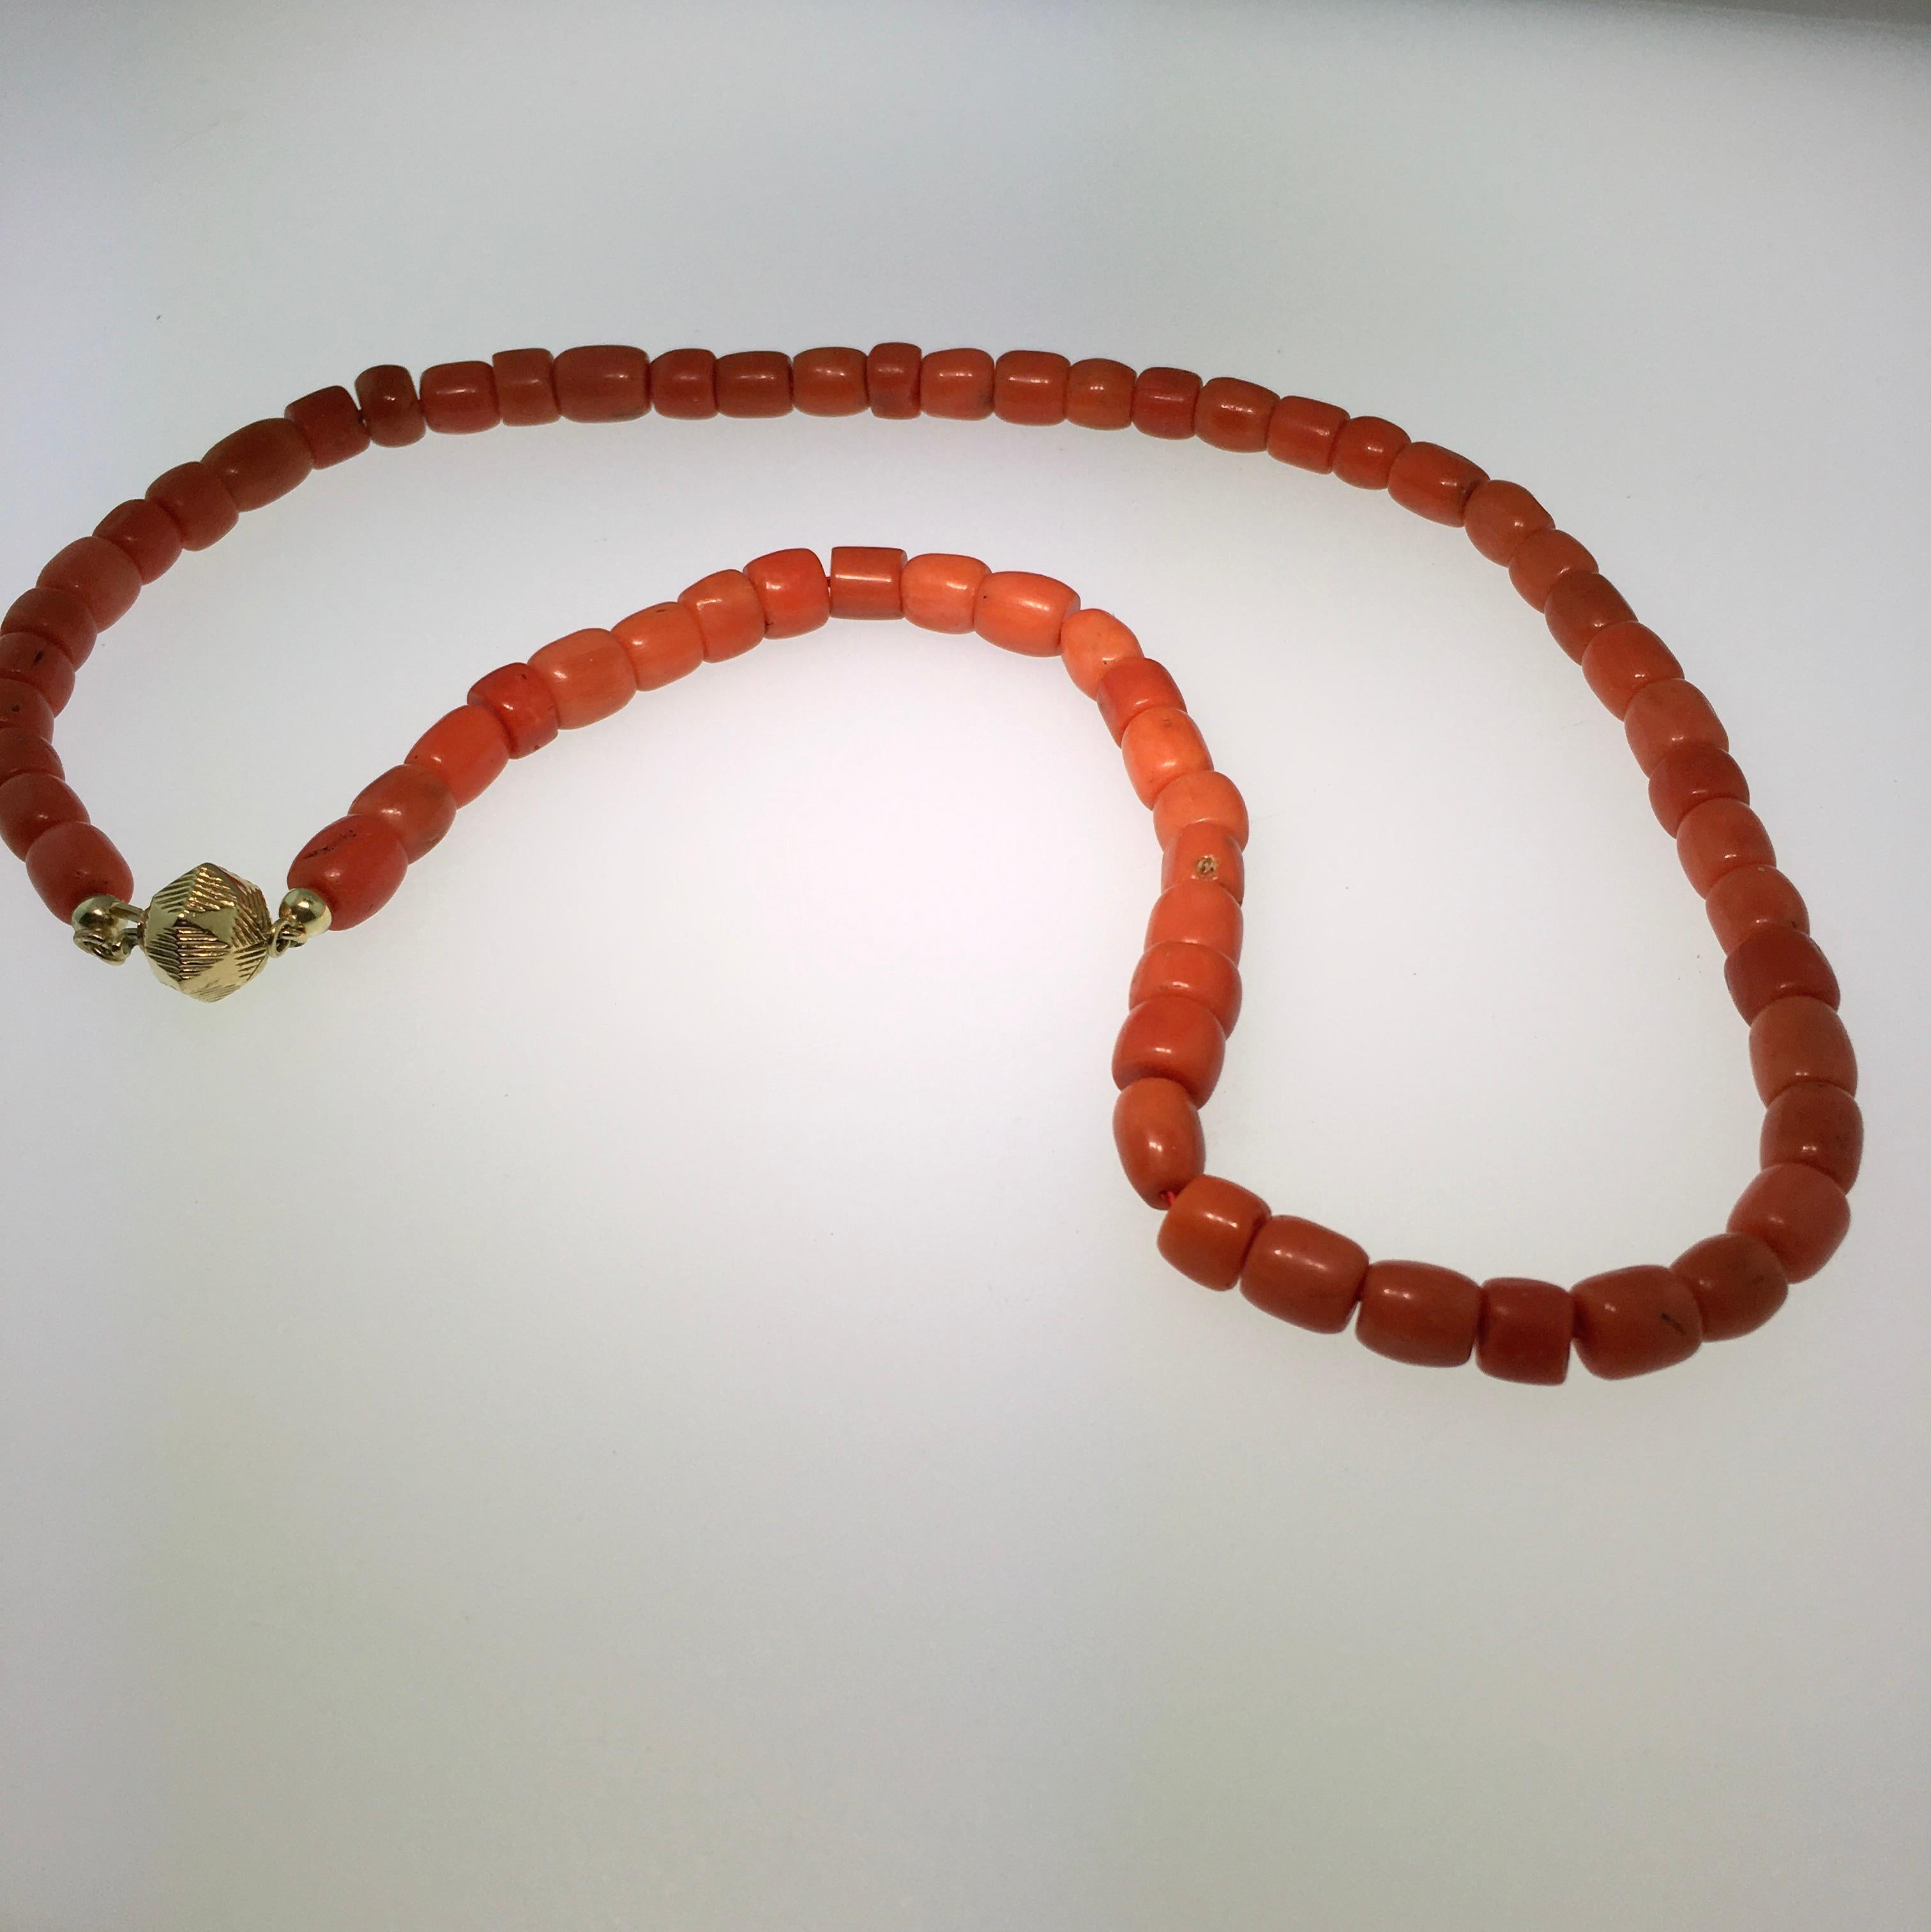 Antique 100% Genuine Mediterranean Sea Red Coral Necklace, Beautiful Antique 14 carat yellow Gold lock with typical Dutch decoration.
This Necklace of Mediterranean sea is 100% genuine precious coral: (Corallium Rubrum), in uniform size and warm